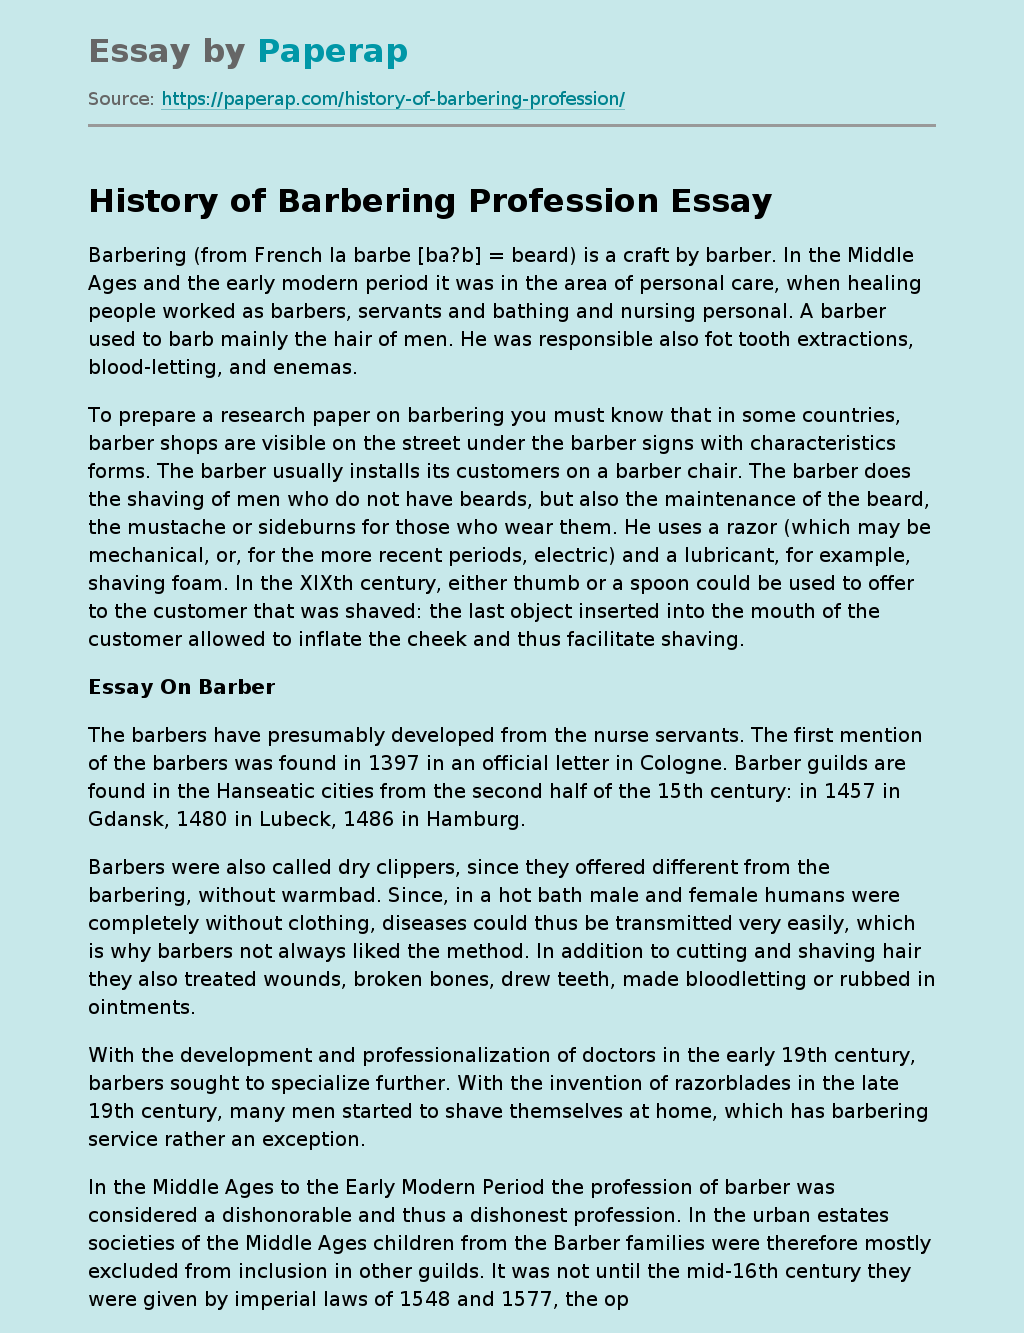 History of Barbering Profession